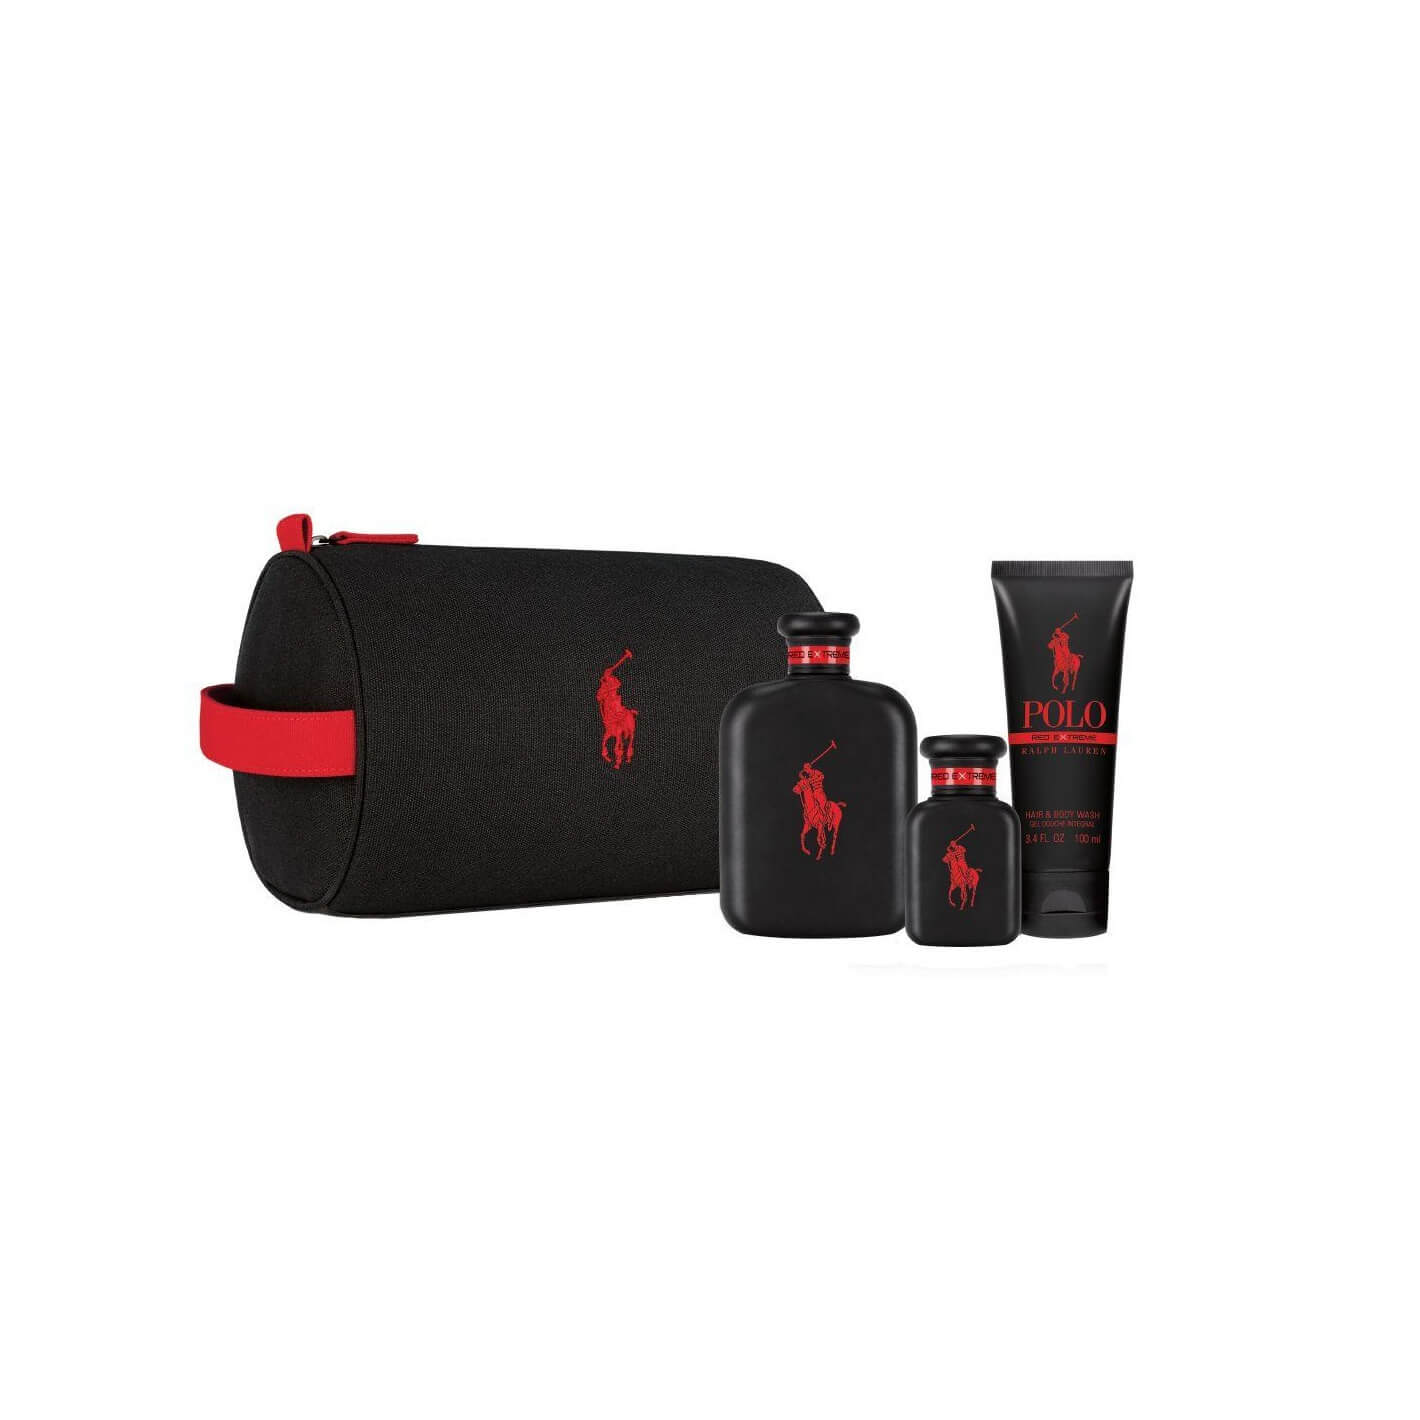 Ralph Lauren Polo Red Extreme Travel Kit 4-Piece Set